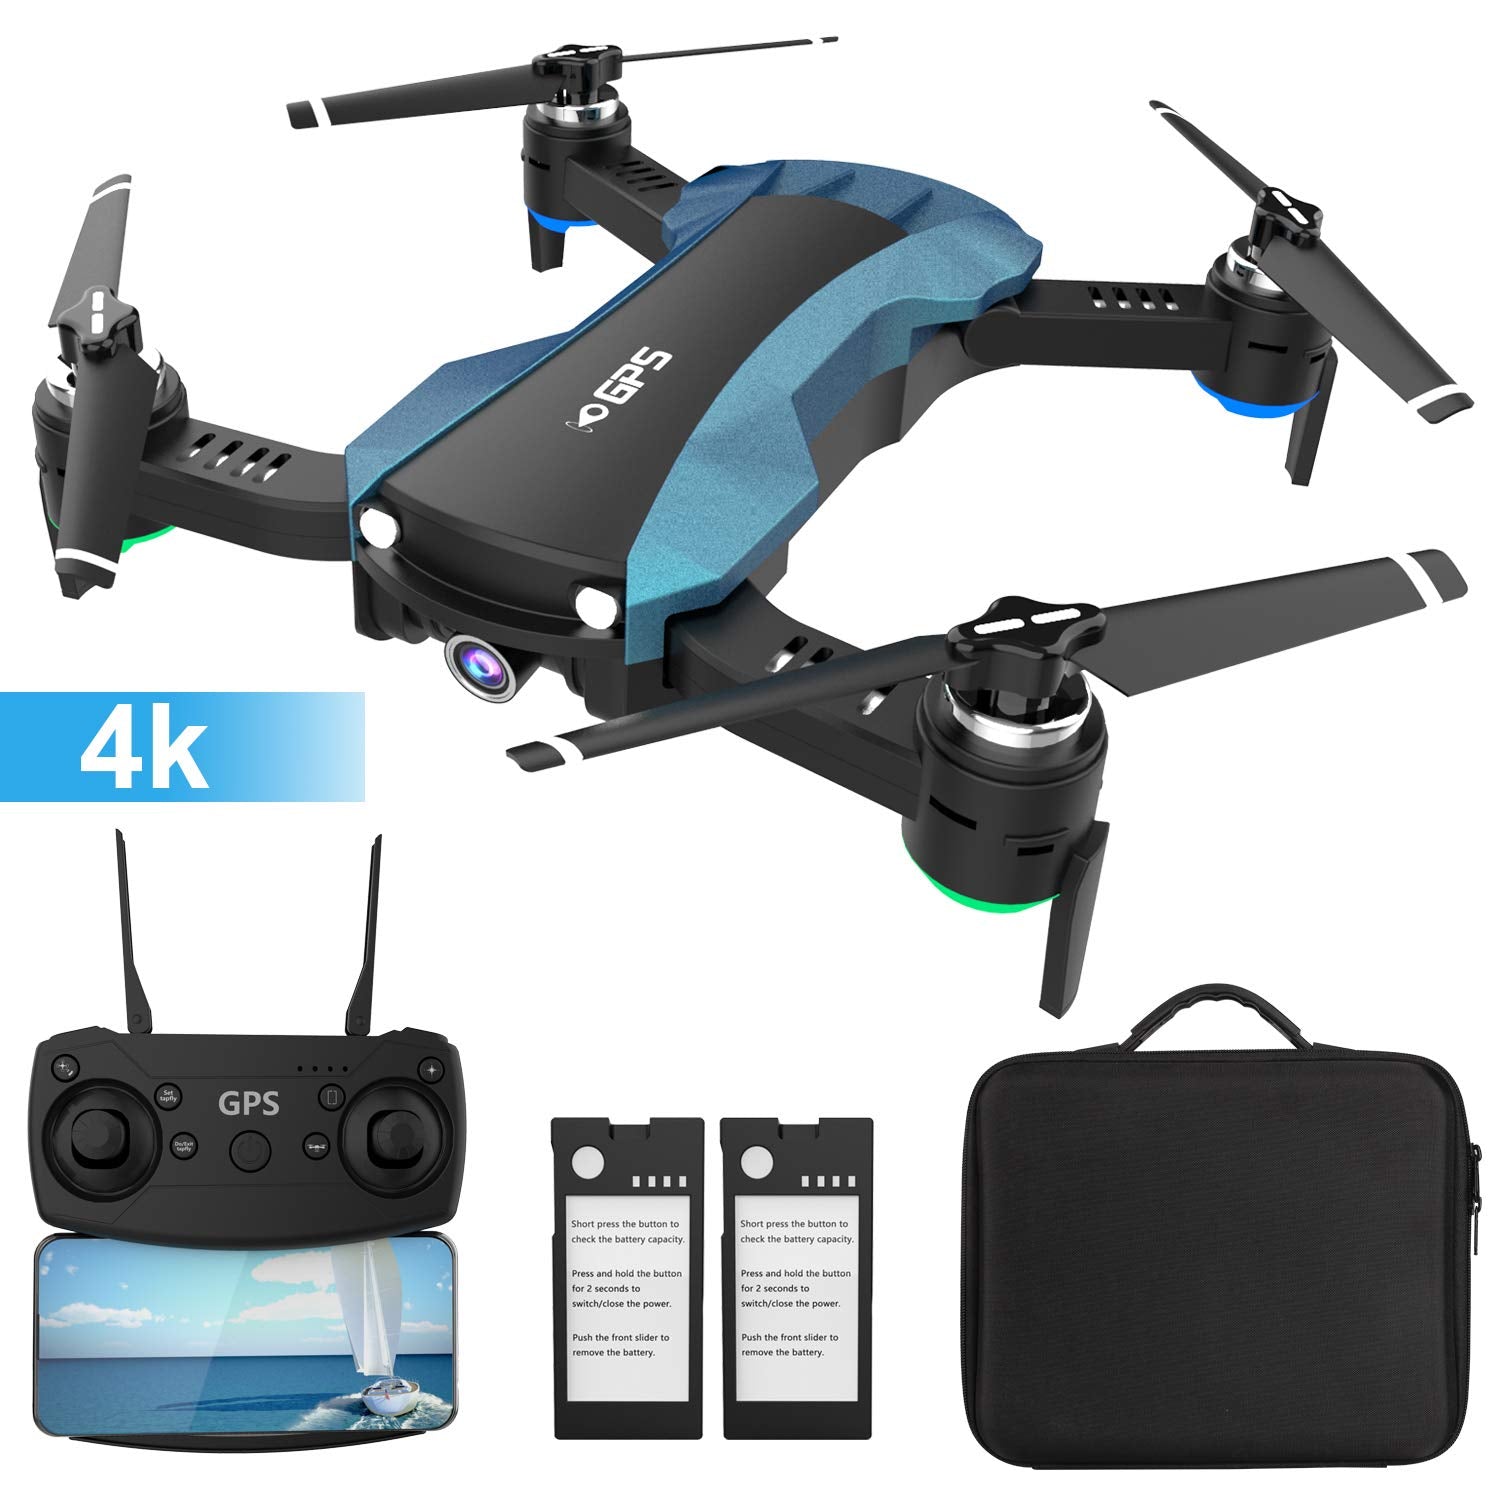 GPS Drone with 4K Camera 5G WiFi FPV RC Quadcopter (Blue)